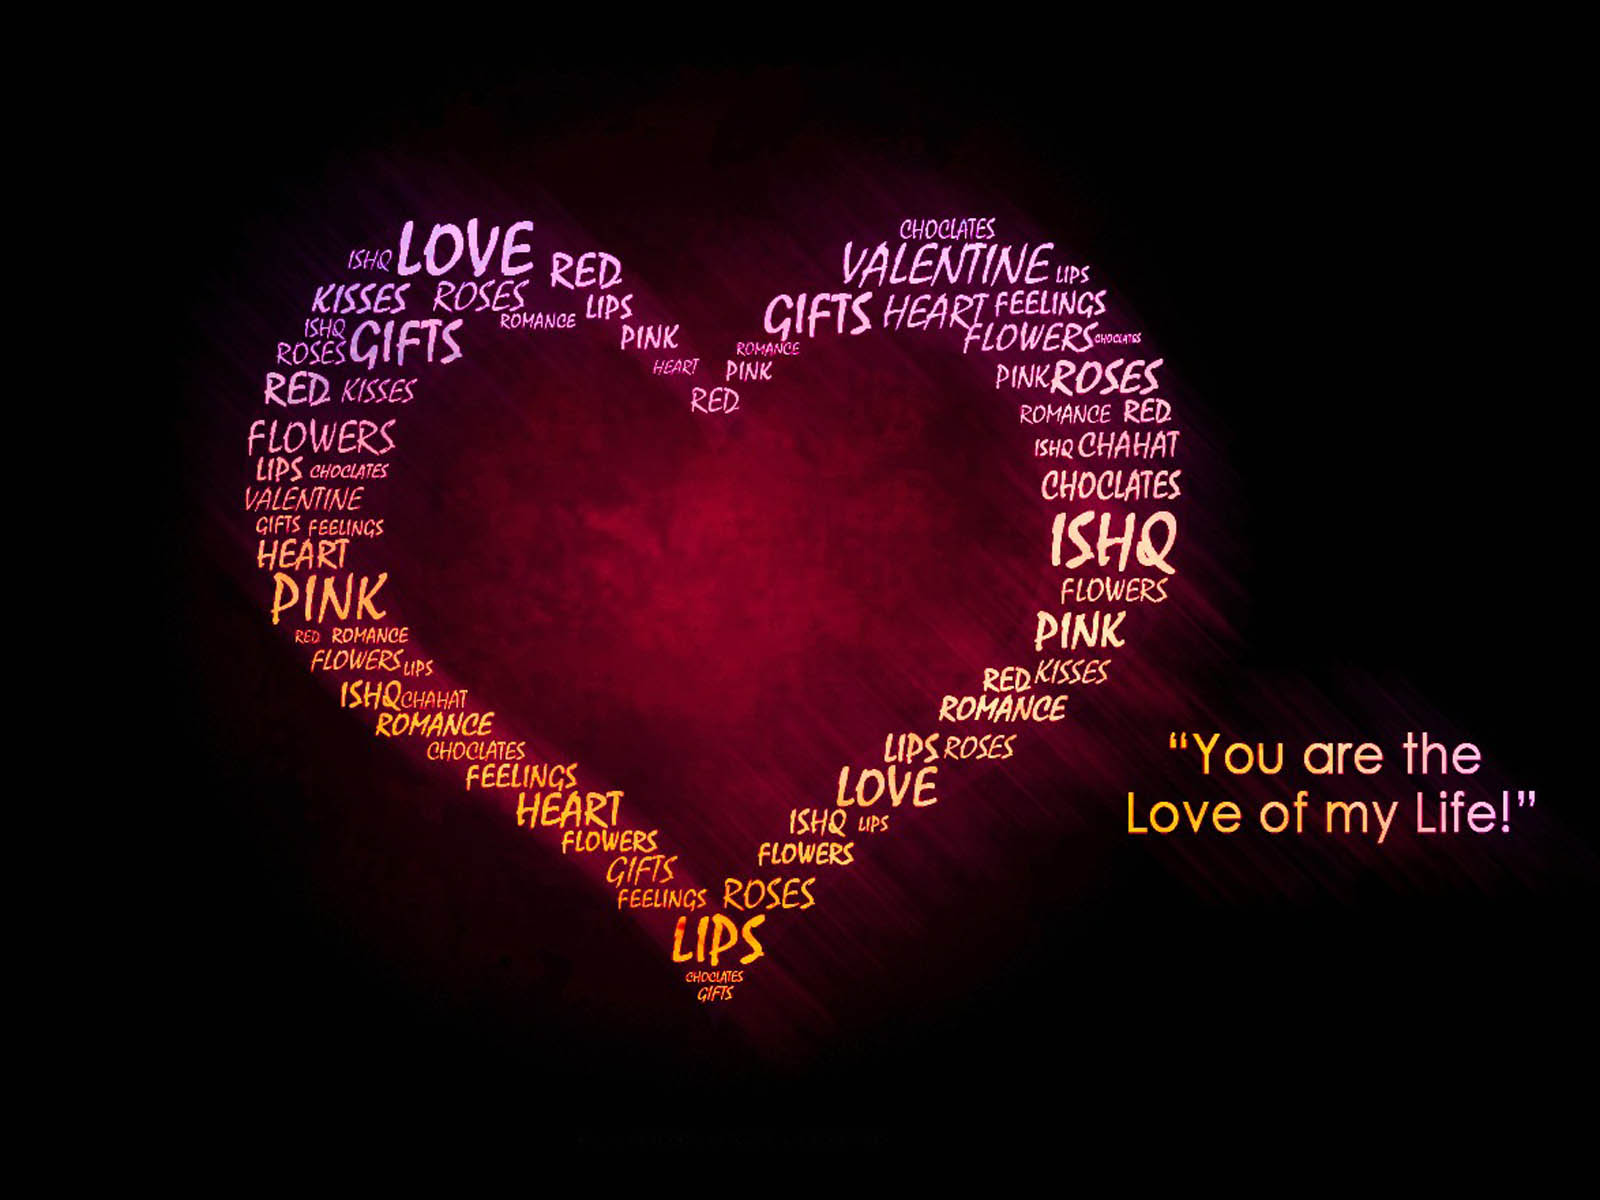  Love Quotes Wallpapers LoveQuotes Desktop Wallpapers Love Quotes 1600x1200